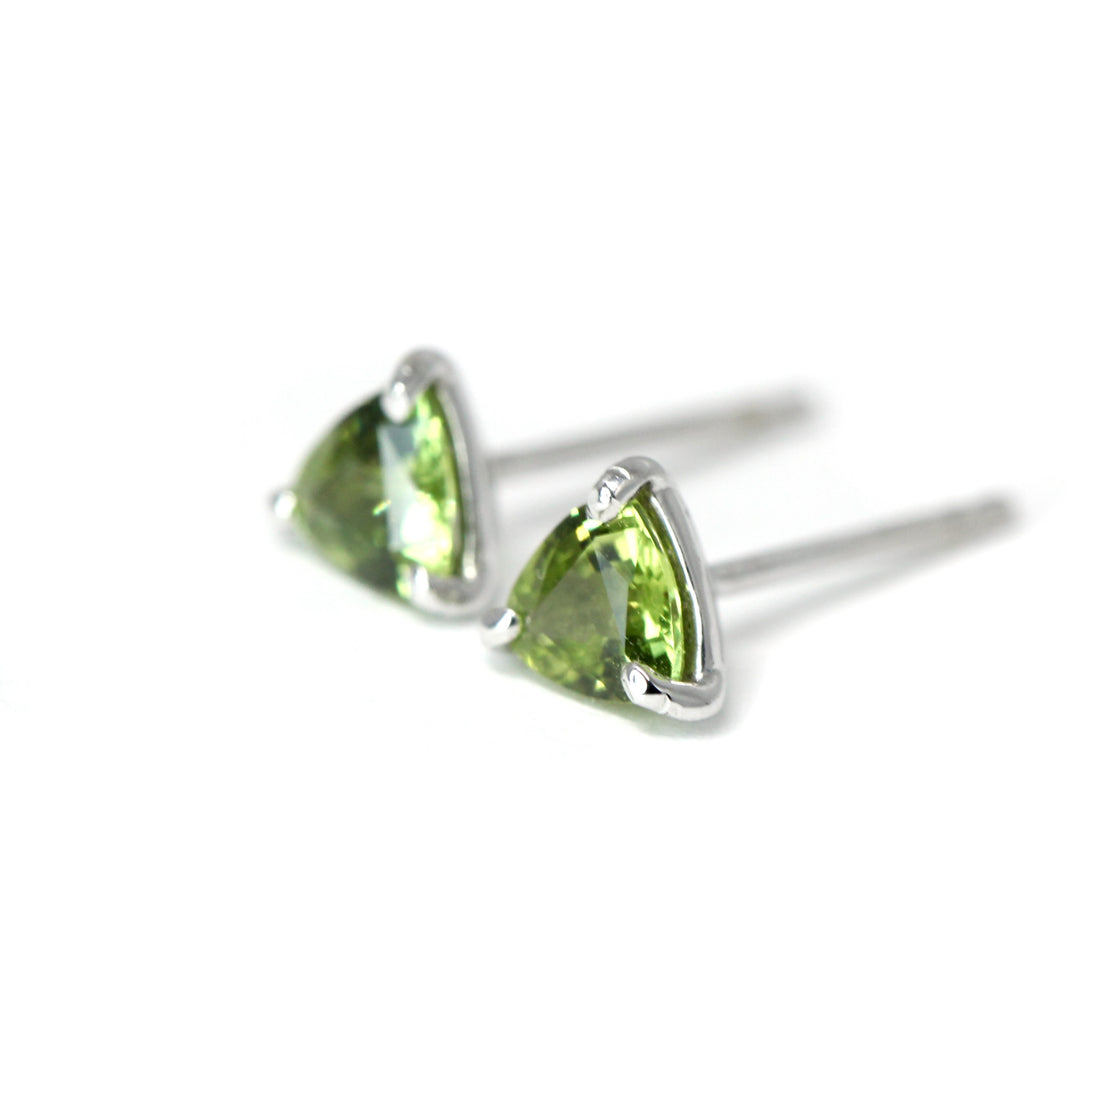 Front view of green sapphire trillion shape studs earrings Bena Jewelry ethical mining montreal little italy jeweler minimalist color gems jewelry montreal made in canada small color gemstone earrings